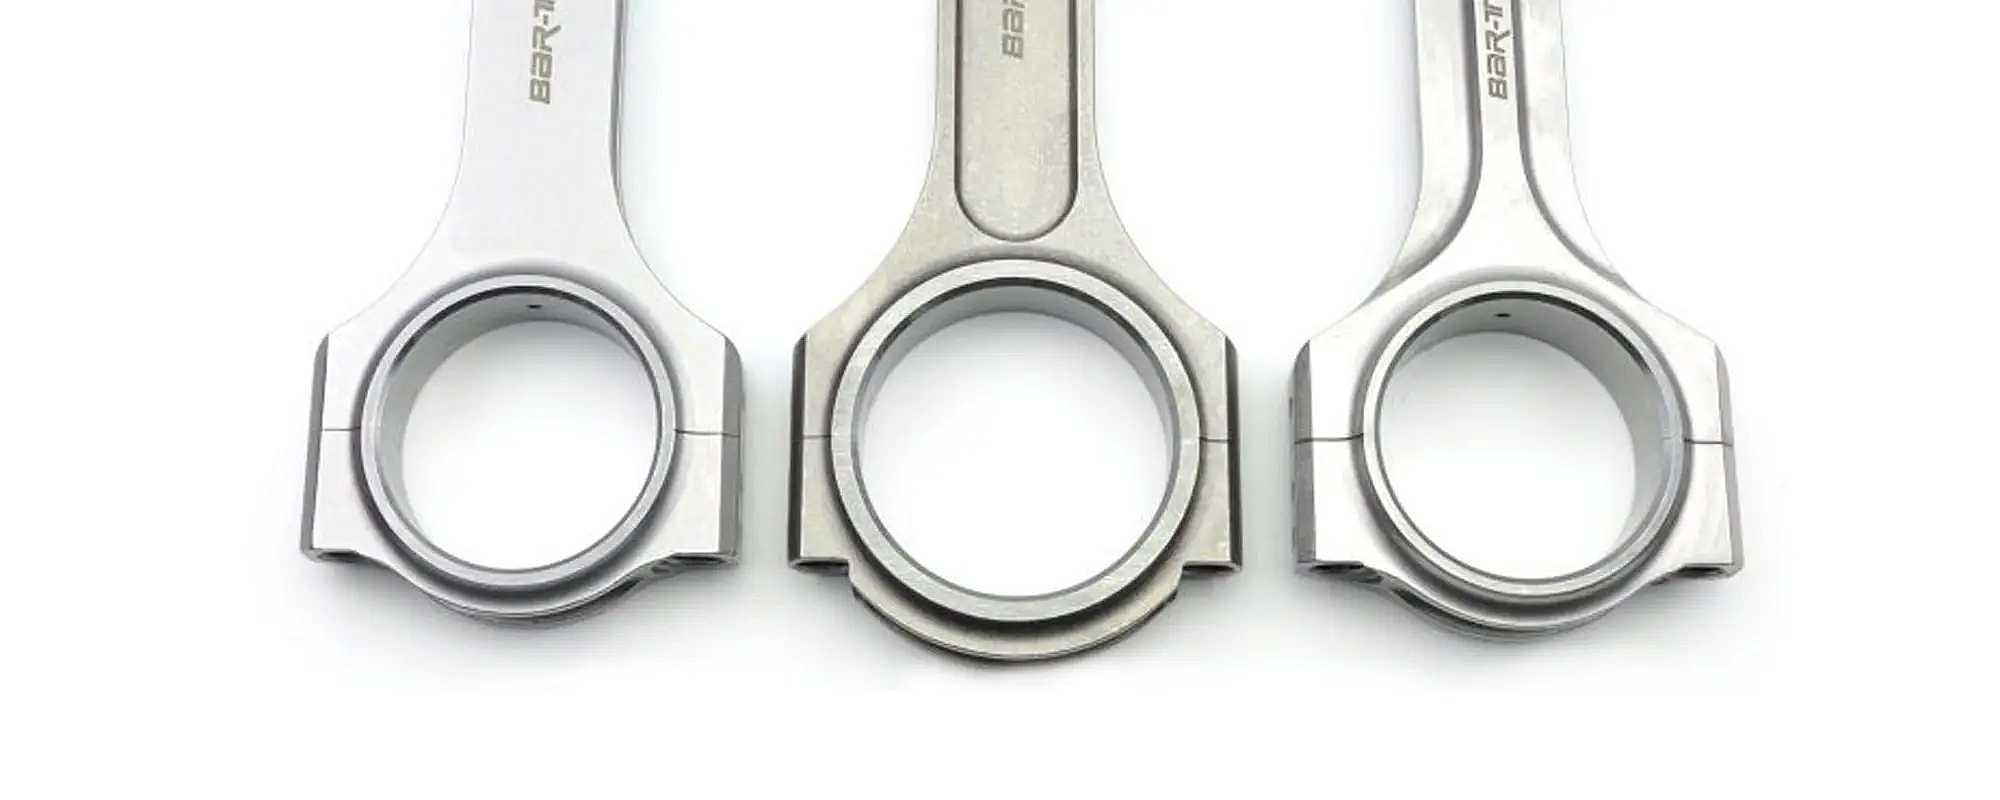 Connecting rods - These types of con rods are available